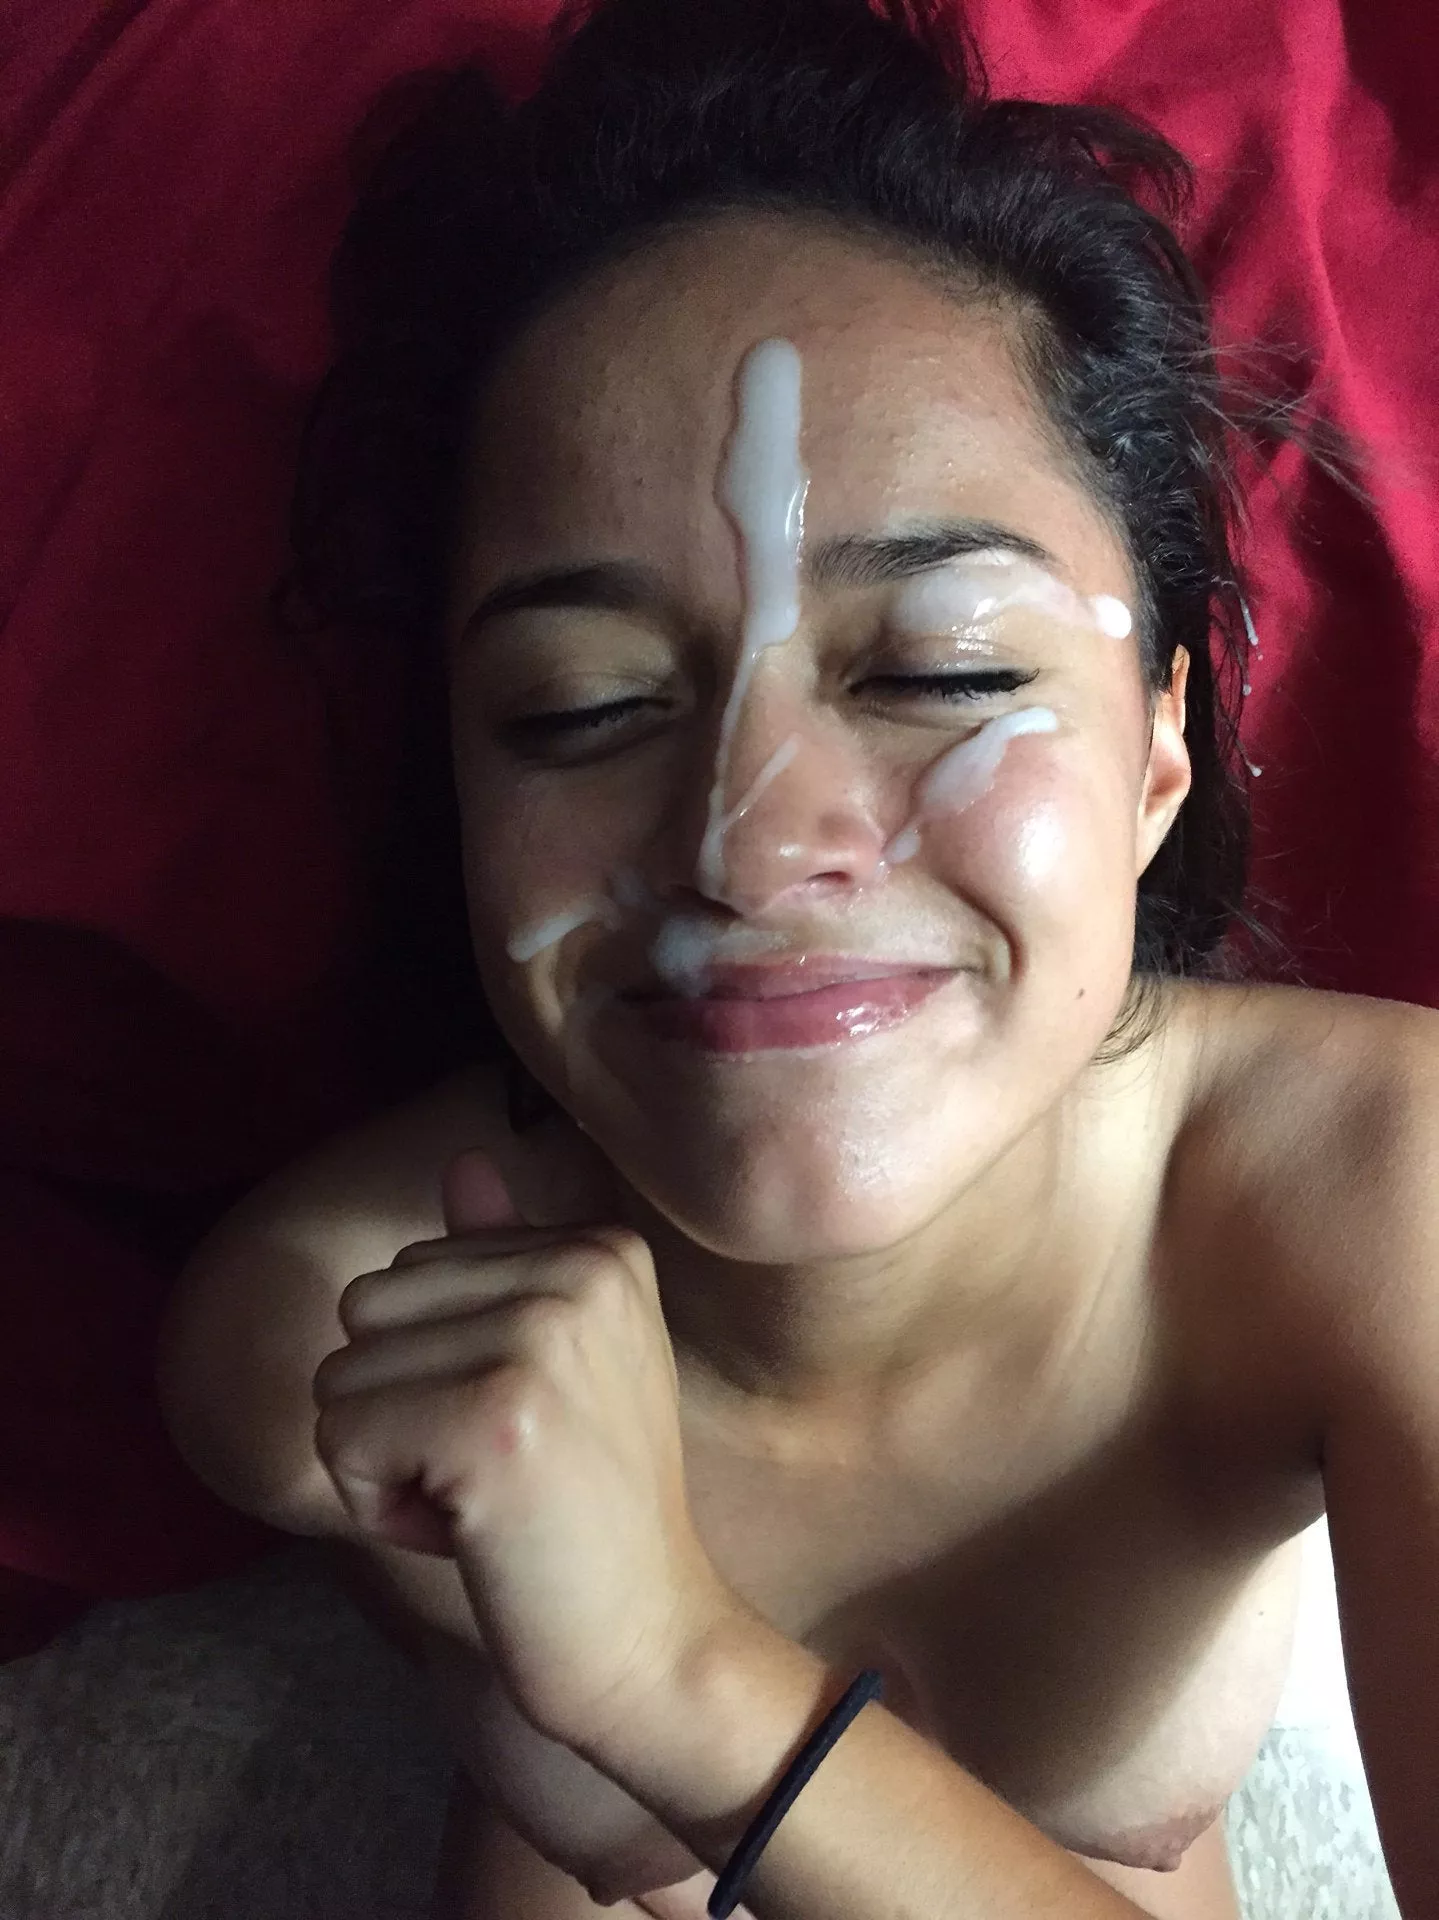 Pretty Facial Nudes Asspictures Org